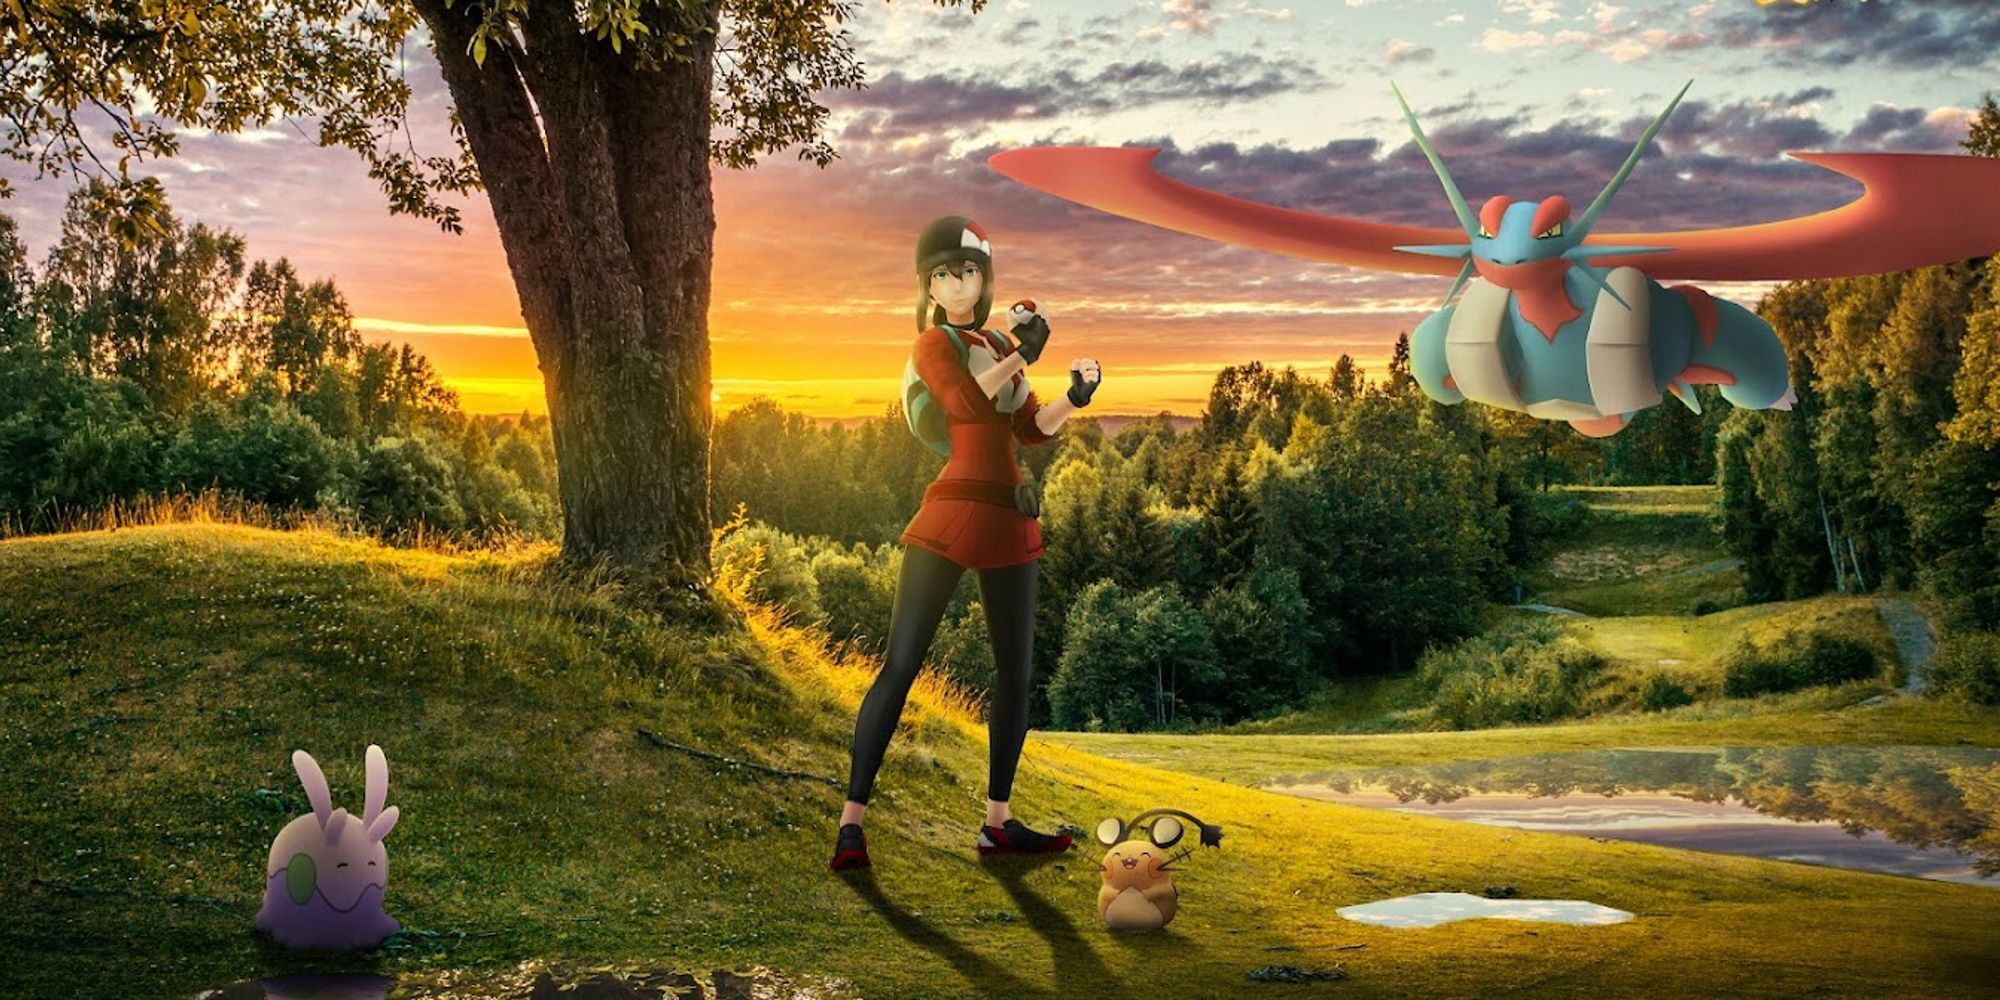 A Pokemon Go trainer standing in a grassy field with Goomy, Dedenne, and Mega Salamence